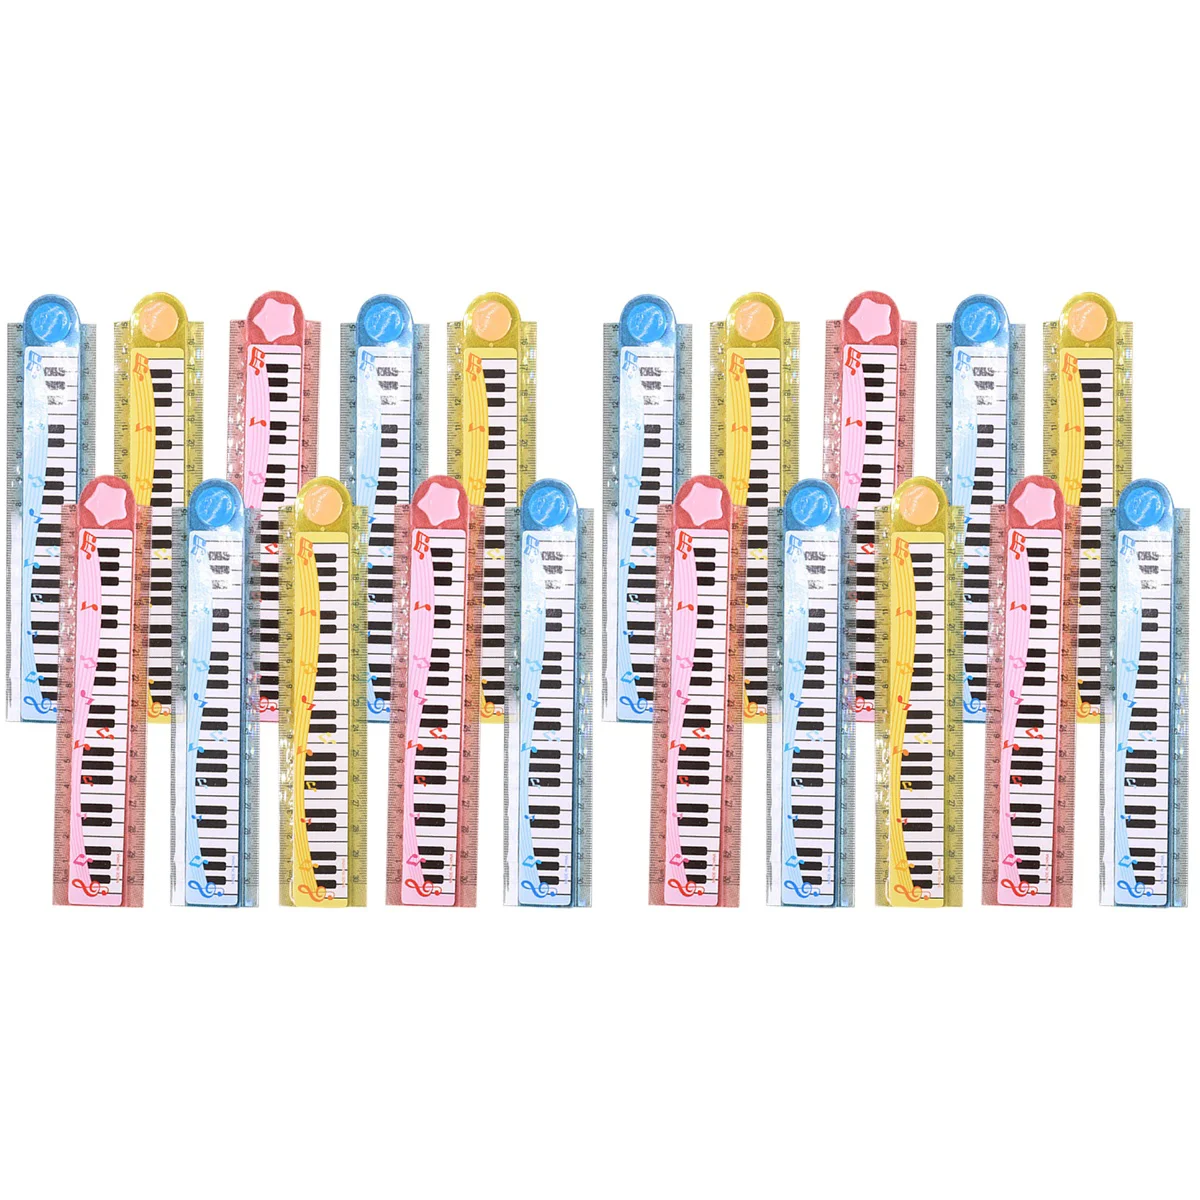 

20 Pcs Convenient Kids Rulers Multi-function Student Rulers Daily Use Children Rulers